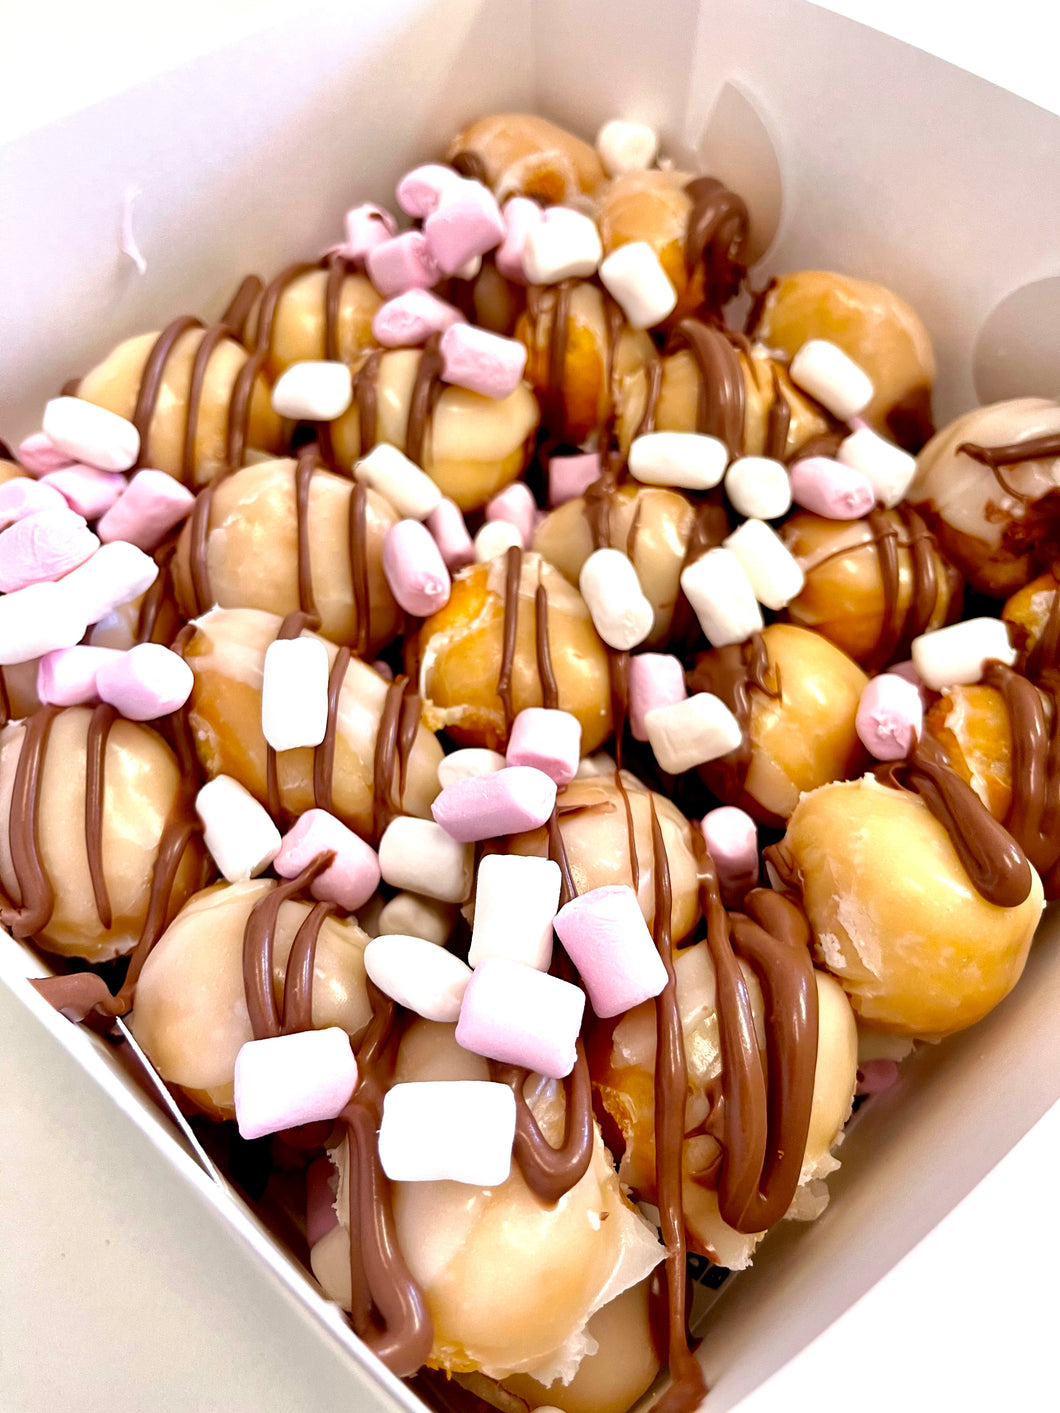 Marshmallow Chocolate Donut Hole Share Pack